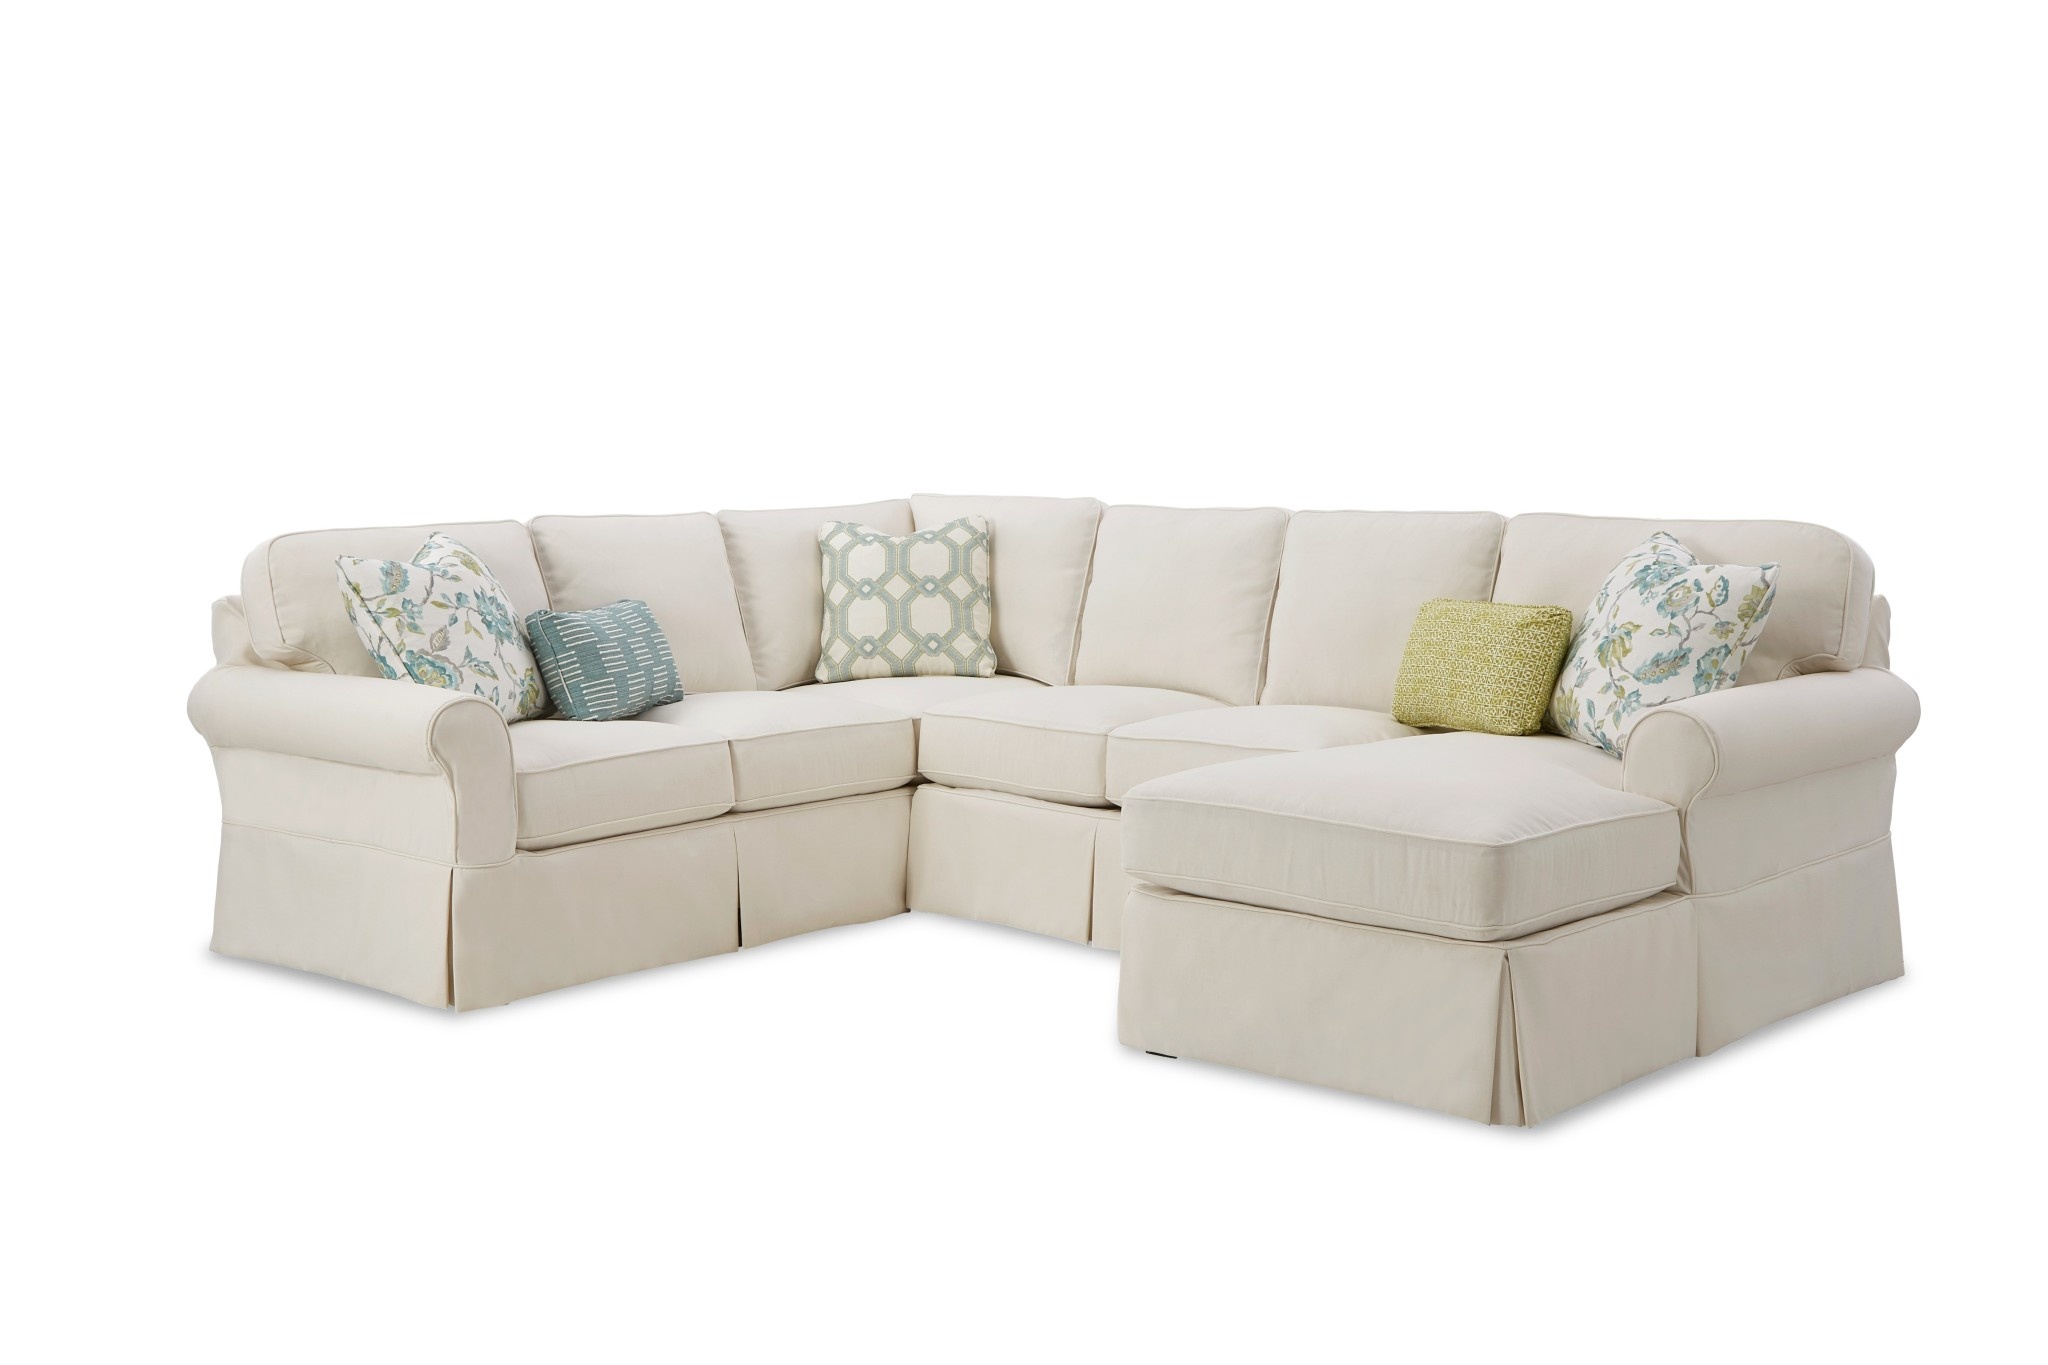 Craftmaster Furniture 9174 Sectional